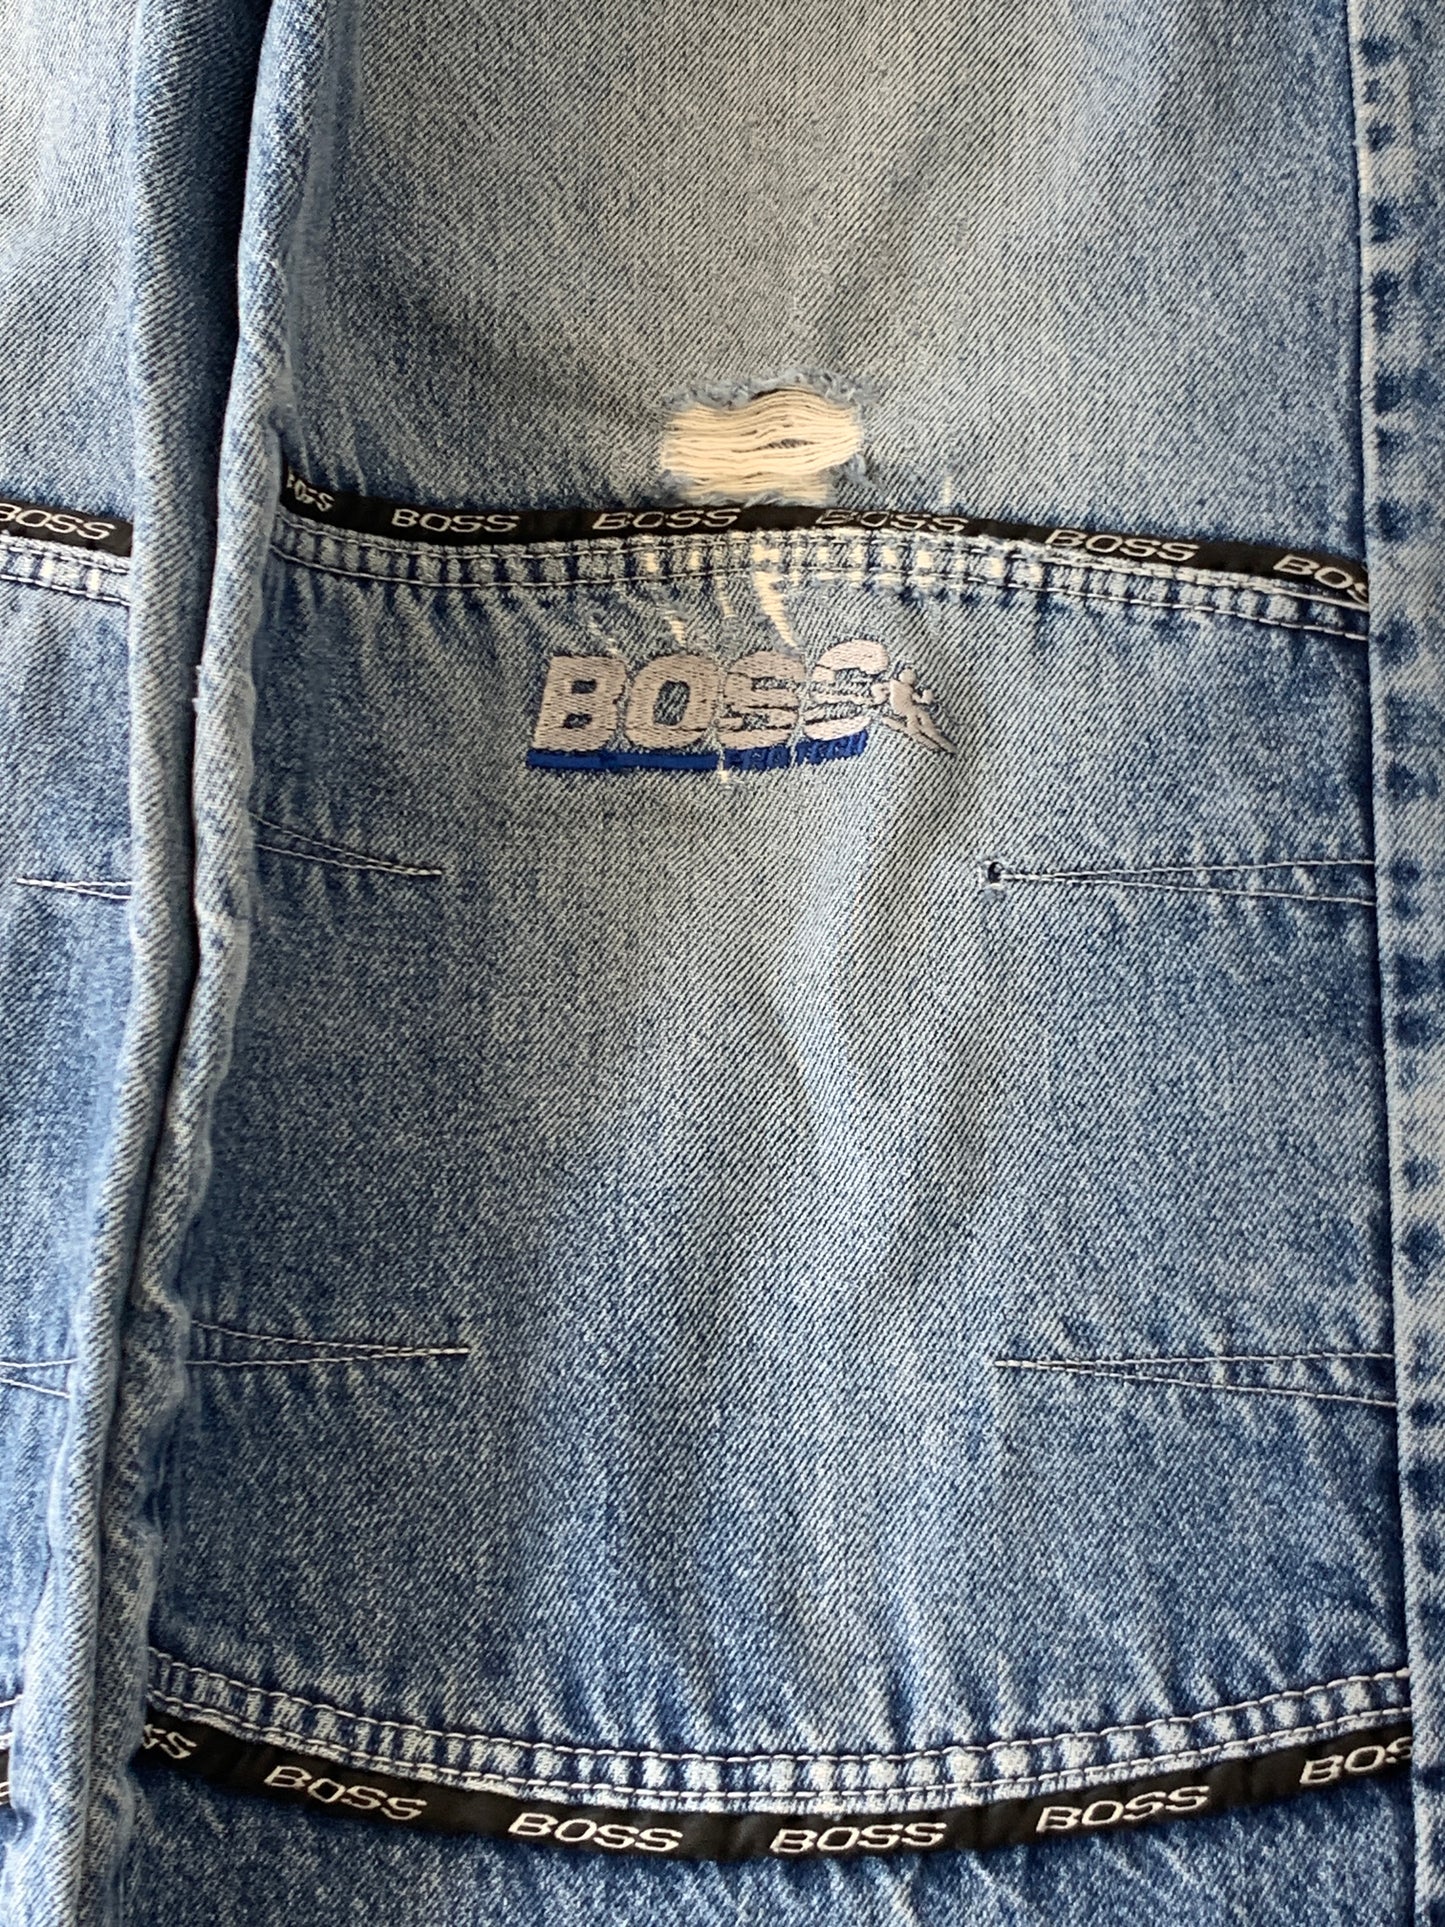 BOSS Vintage Baggy Double Knee Jeans - 30 x 32